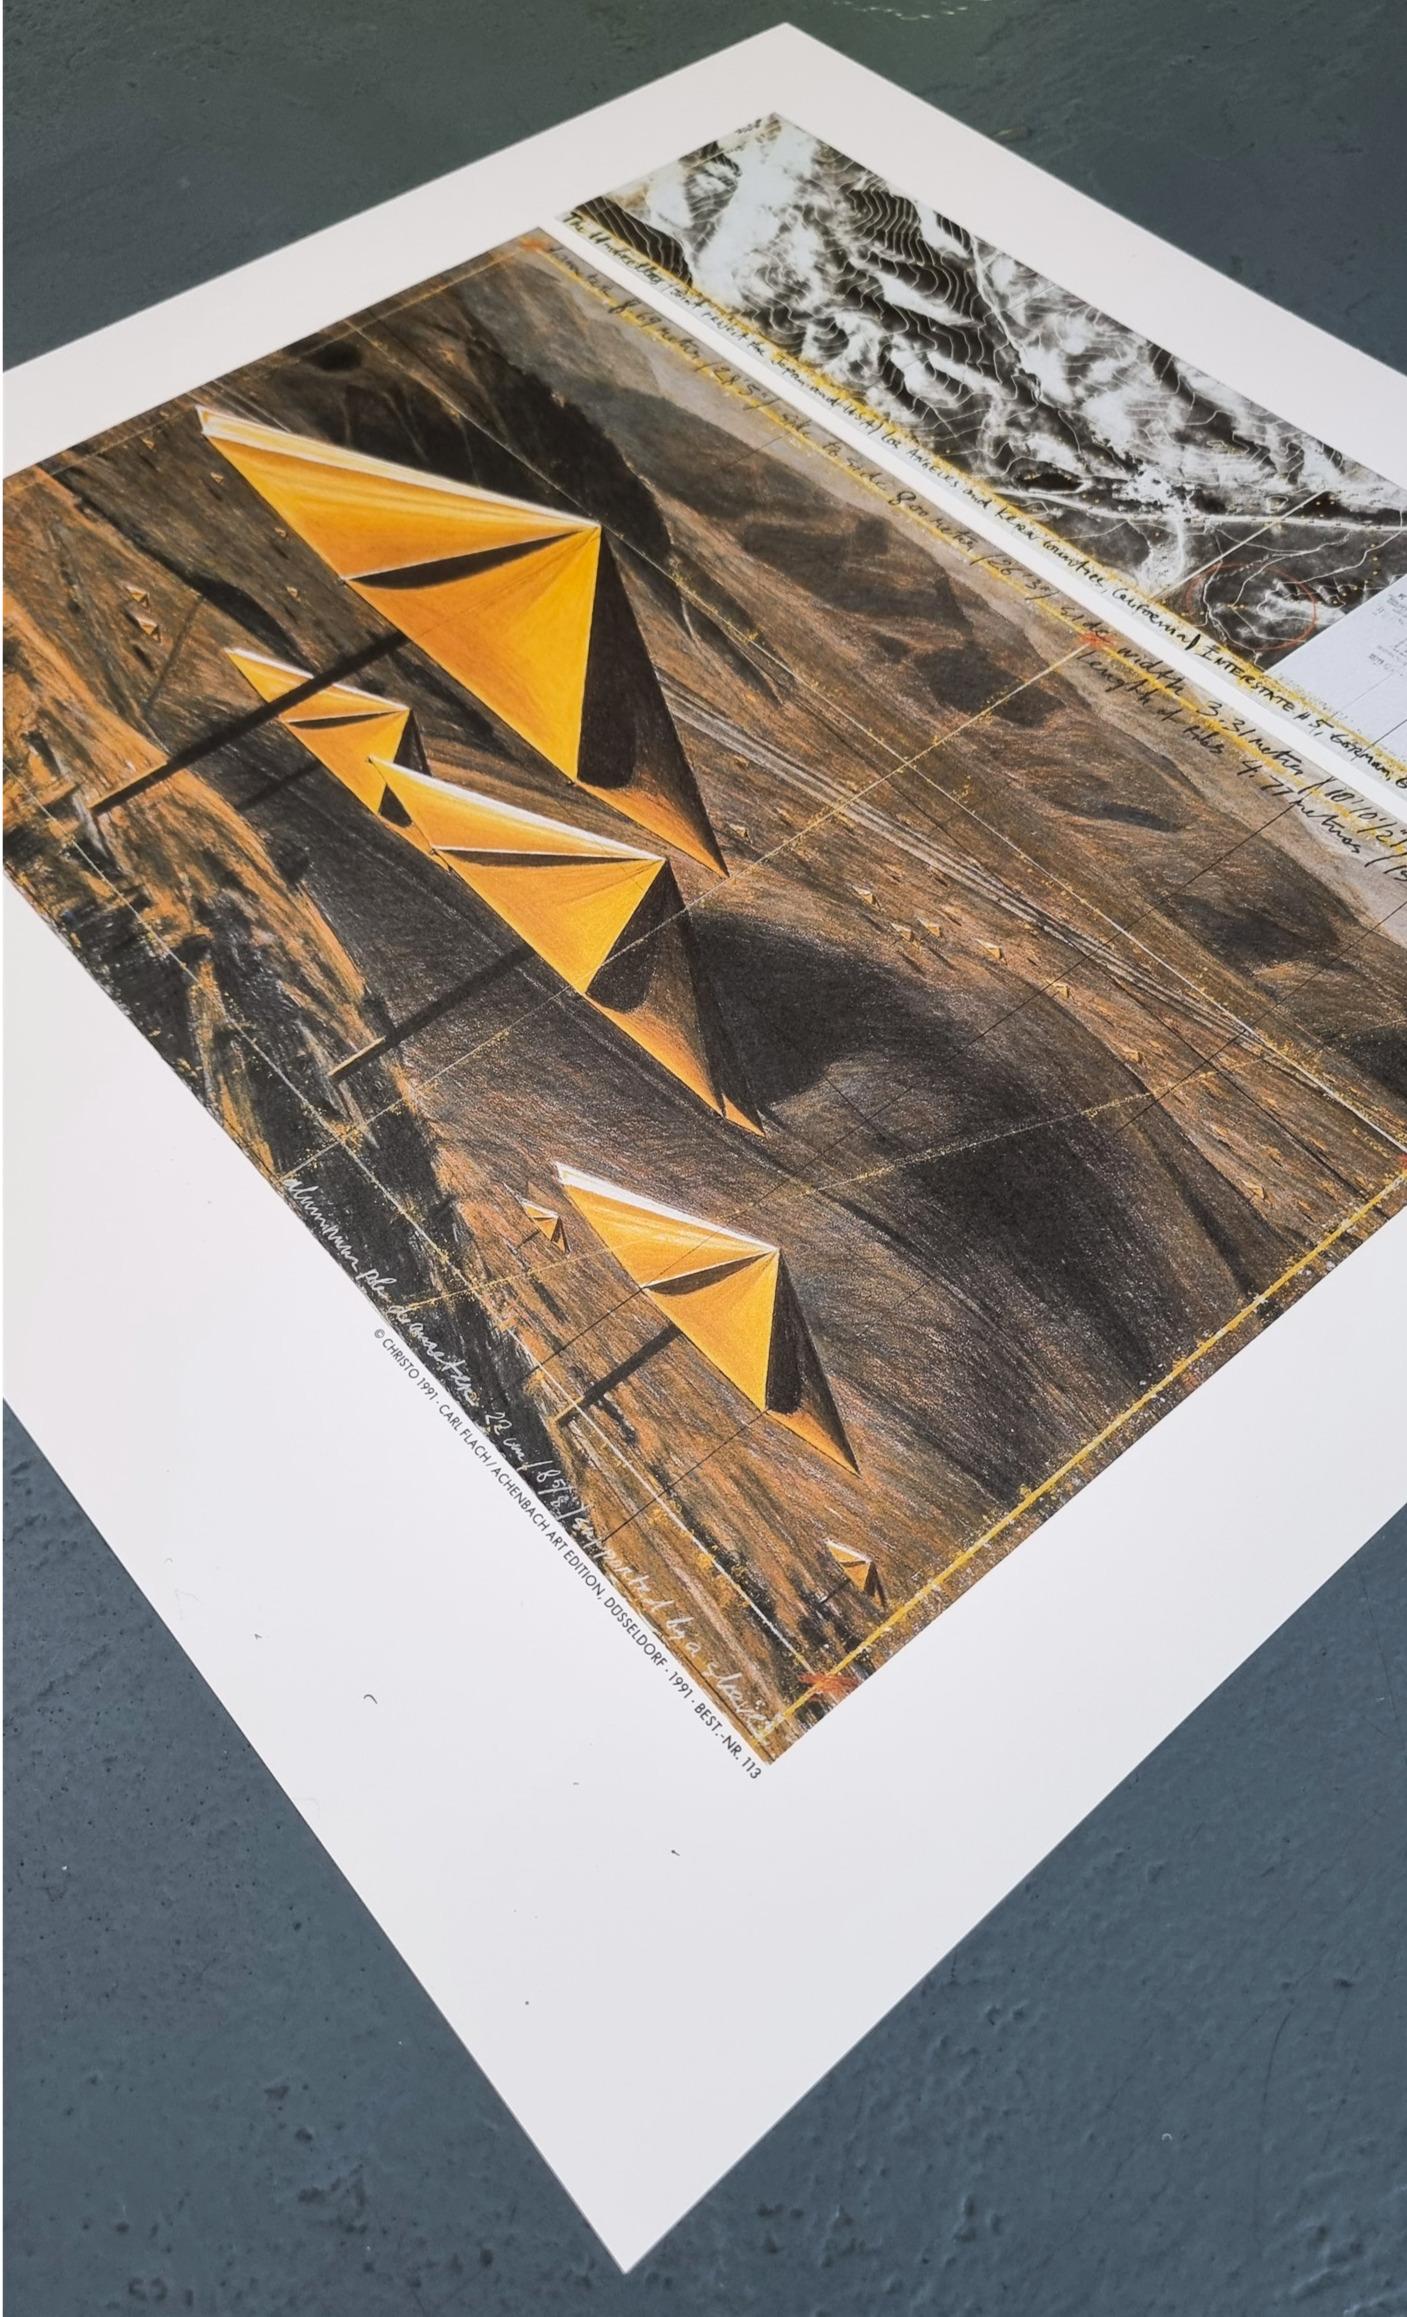 COULD ALSO BE FRAMED IN A BLACK FRAME - SAME SIZE & MODEL

Christo
The Umbrellas (Yellow & Blue)
Lithoserigraphs
Year: 1991
Size: 14.6 × 16.4 on 19.1 × 19.9 inches (EACH)
Framed: 20.5 x 20.5 x 2.5 inches (EACH)
Printer's Chop lower left
Printer: